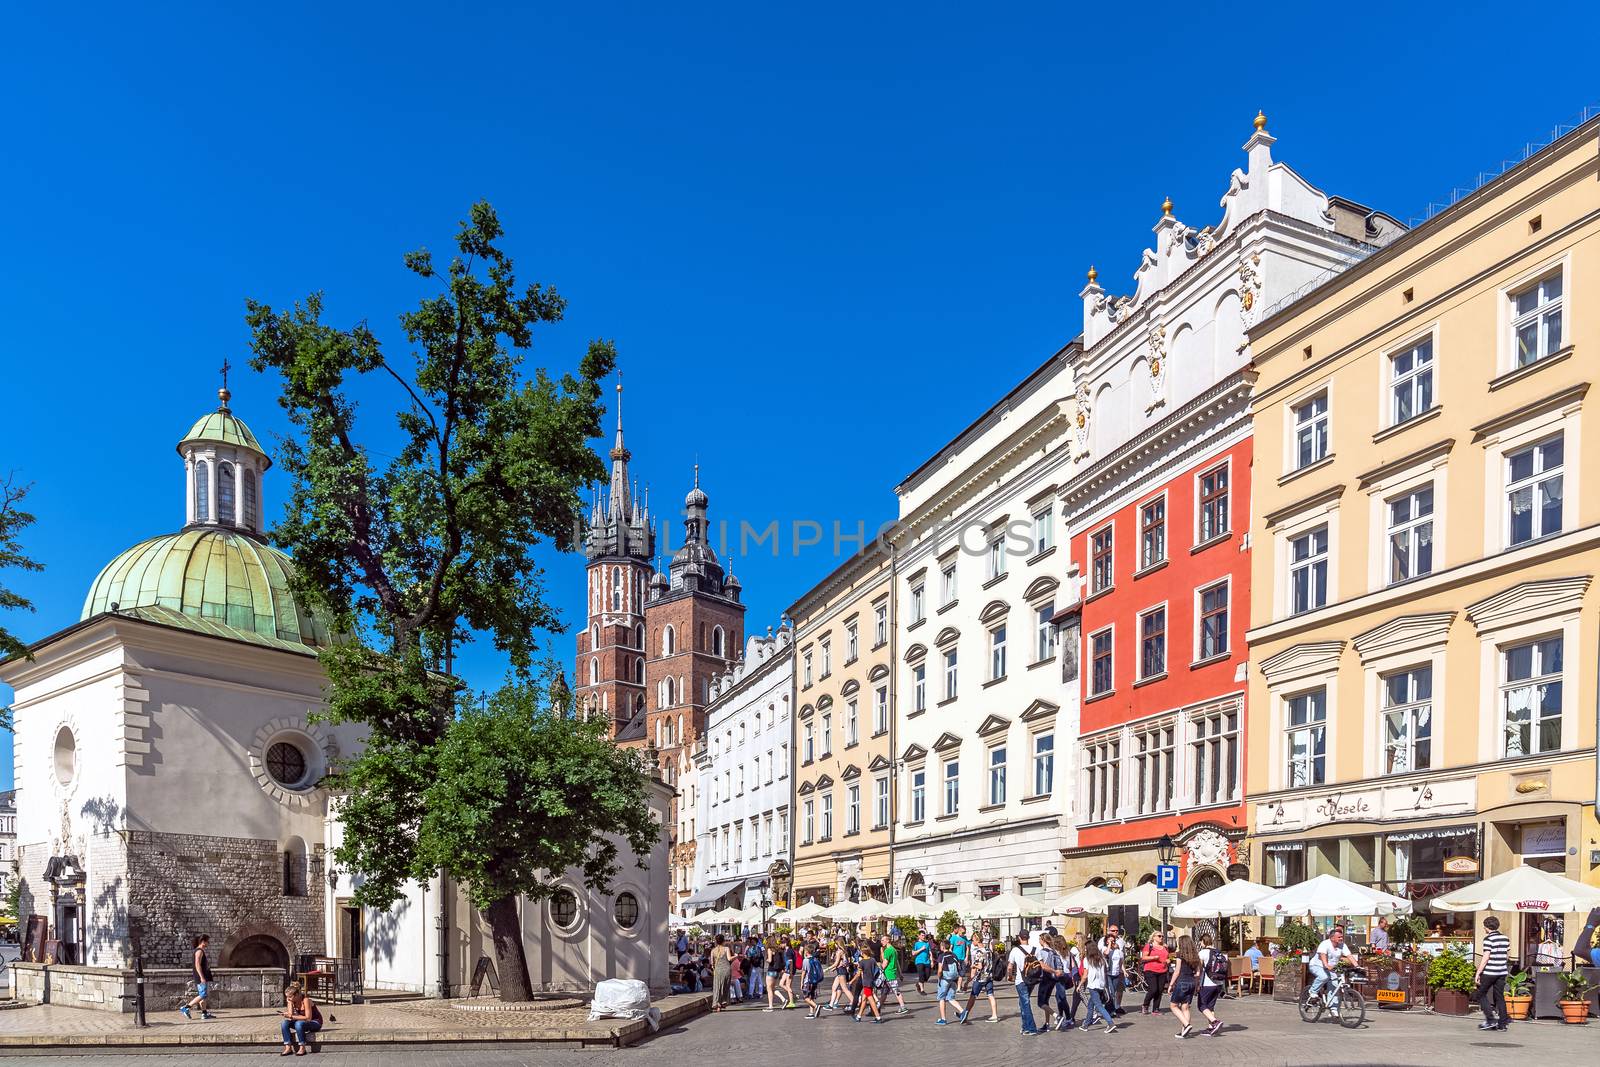 St. Adalbert (in the foreground) and St. Mary churches in the Main Square in Krakow, the most popular destination in Poland, full of many attractions for tourists.